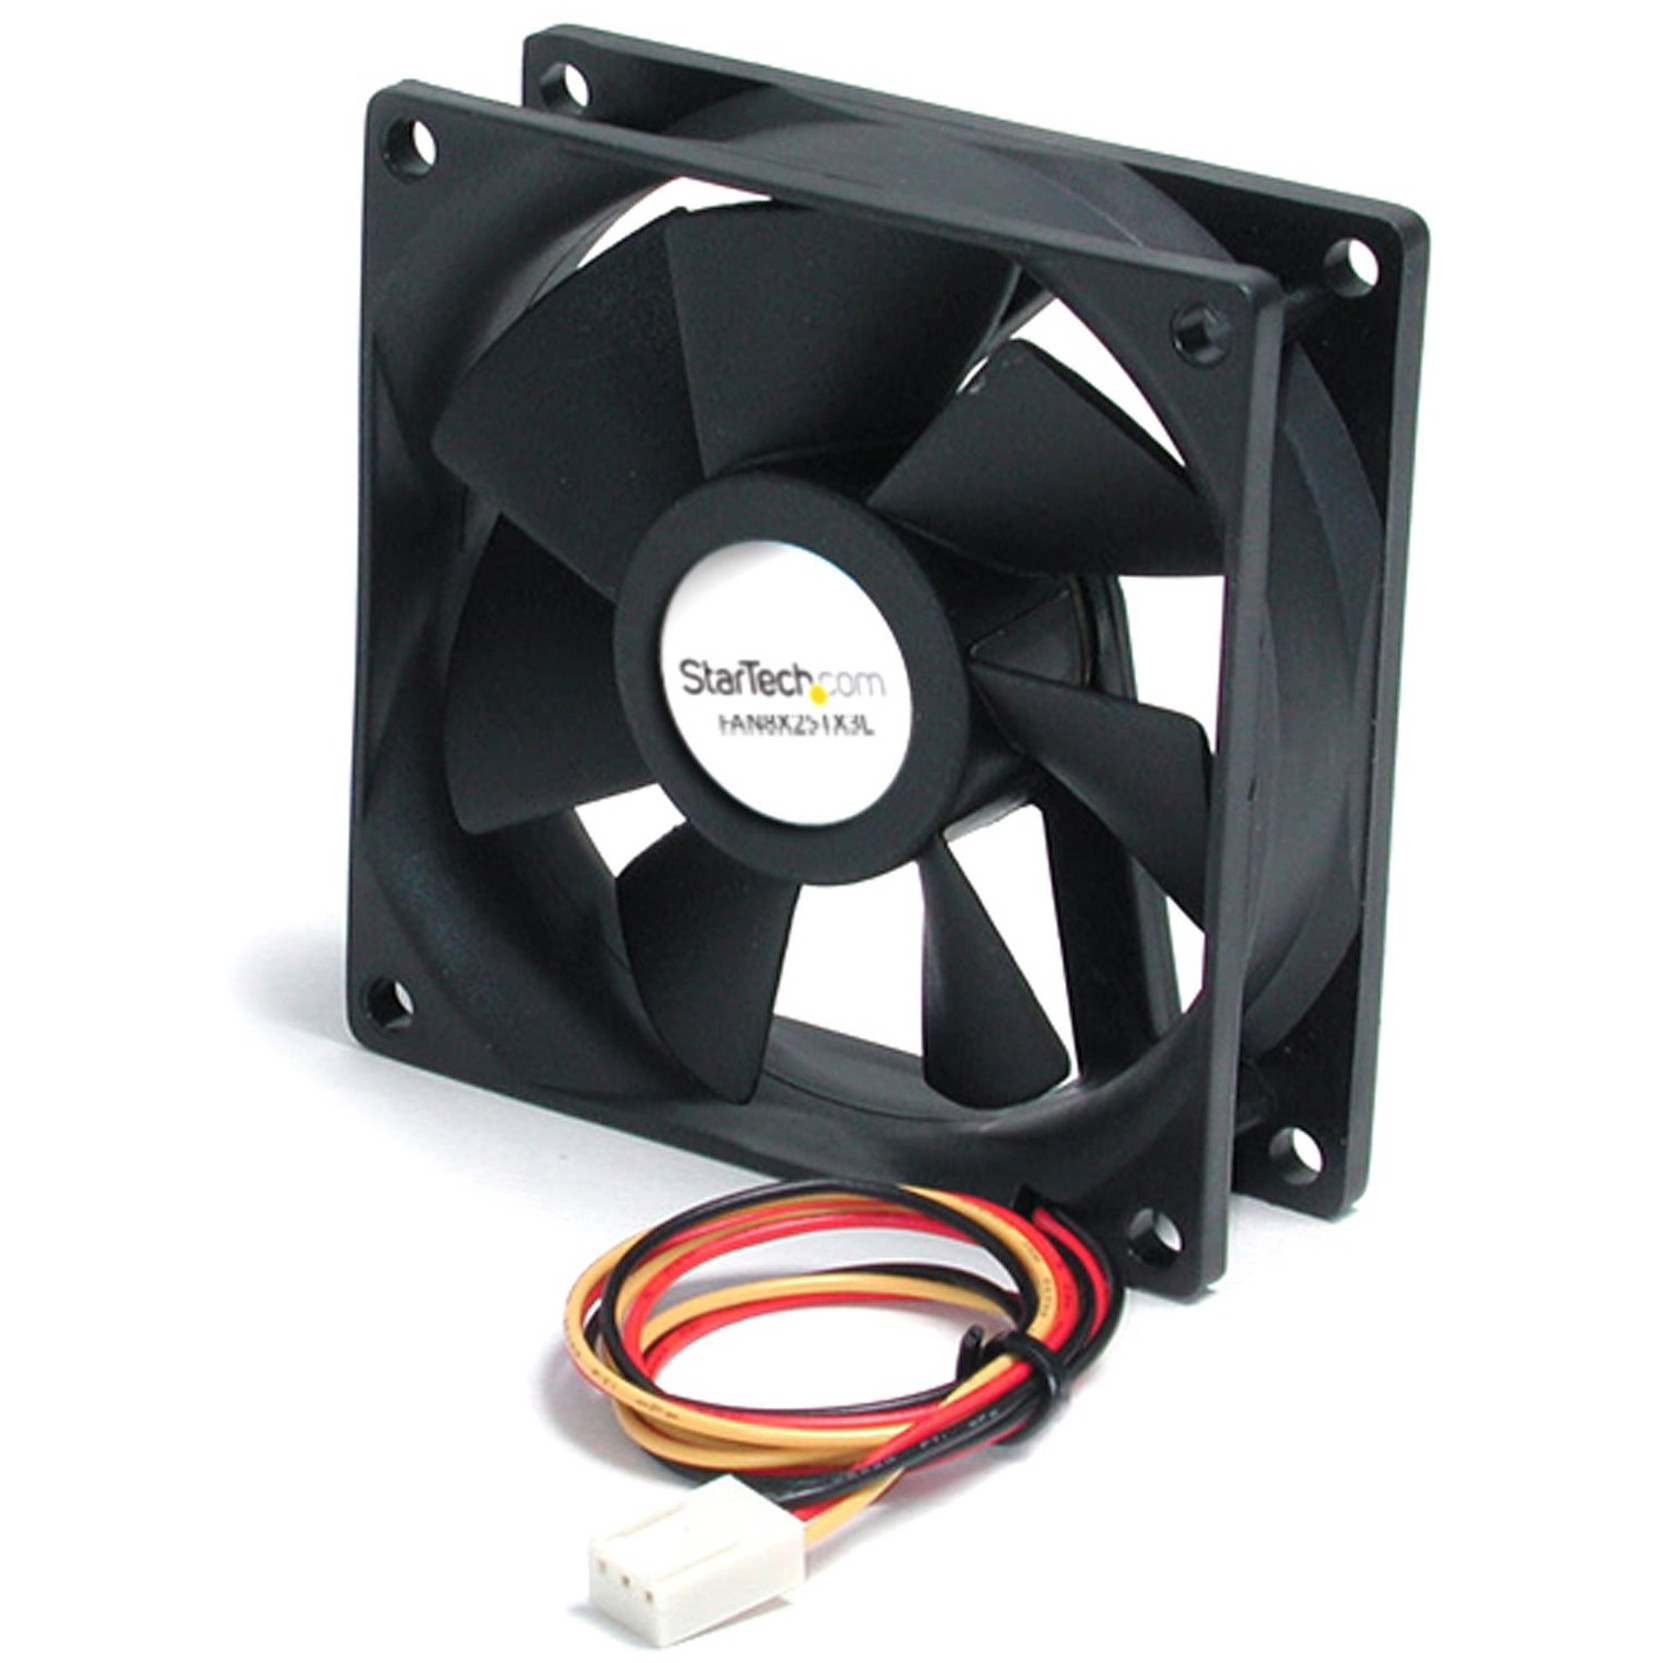 Startech .com 80x25mm Ball Bearing Quiet Computer Case Fan w/ TX3 ConnectorFan KitAdd additional chassis cooling with a 80mm ball beari… FAN8X25TX3L